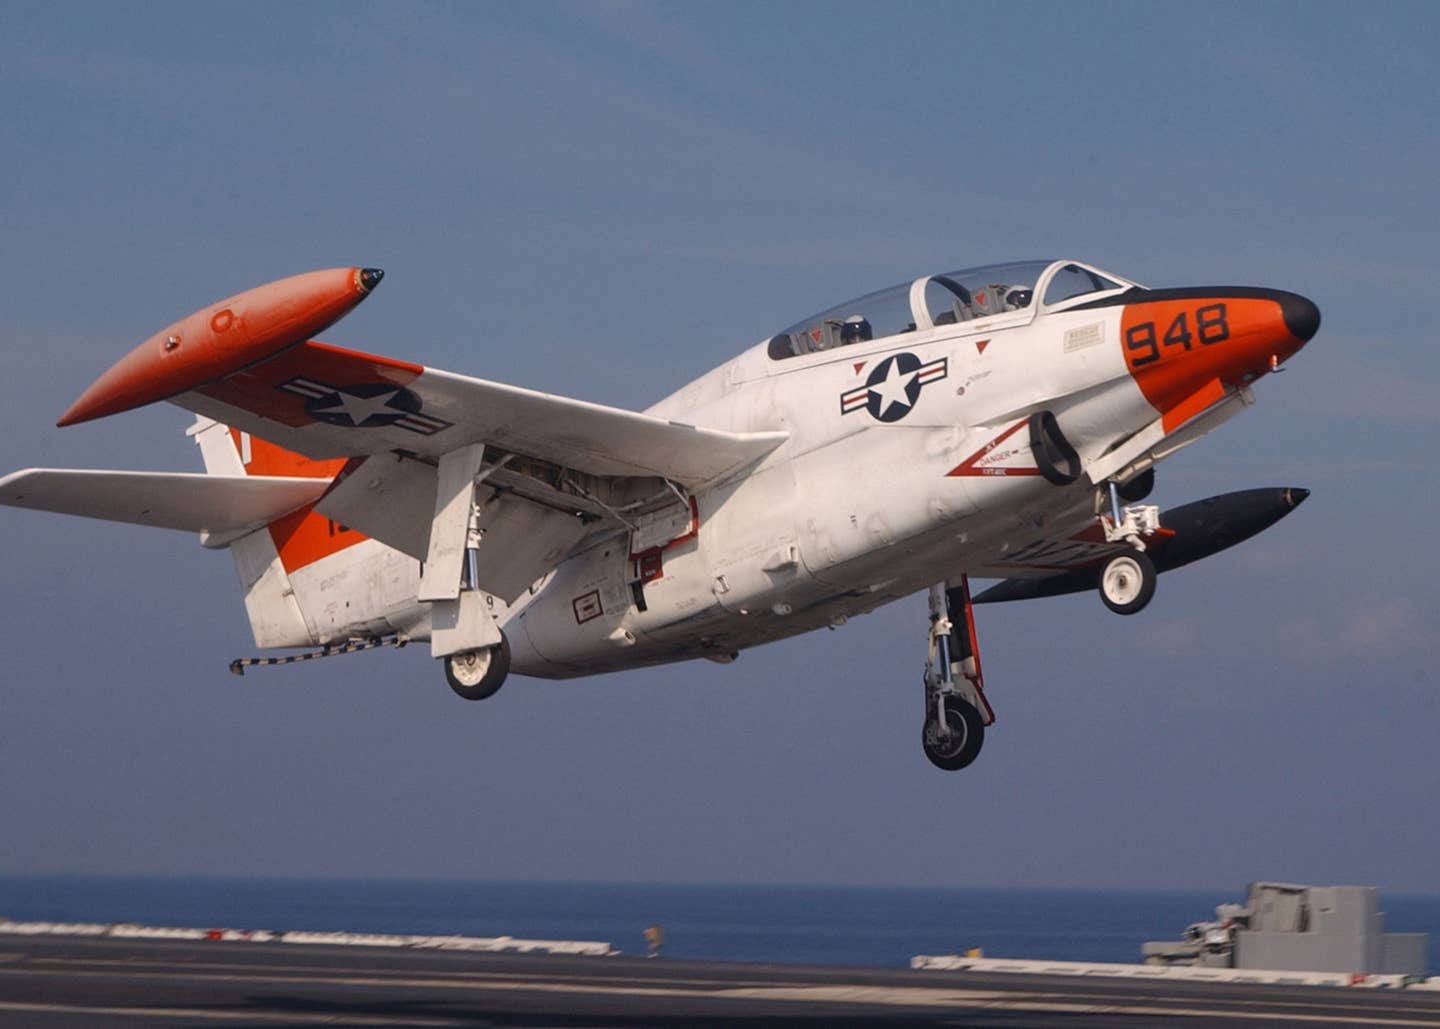 A T-2C Buckeye assigned to Training Squadron Nine (VT-9) performs a touch-and-go on the flight deck of USS <em>Harry S. Truman</em> (CVN-75) in July 2003. This was the last time the Buckeye was used to train student pilots aboard aircraft carriers. <em>U.S. Navy photo by Photographer’s Mate 2nd Class Danny Ewing Jr</em>